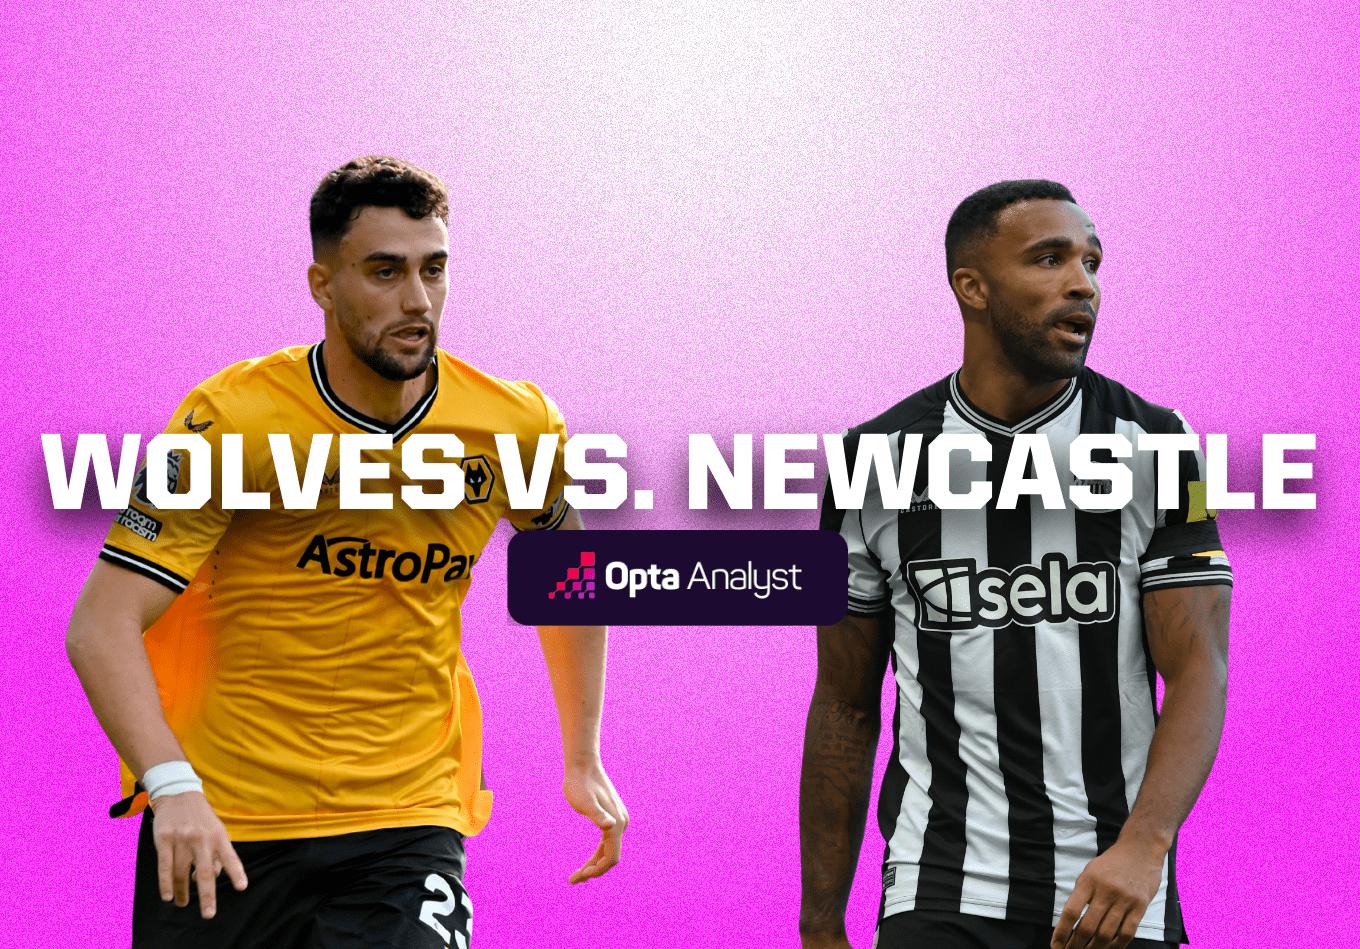 Wolves vs Newcastle: Preview and Prediction